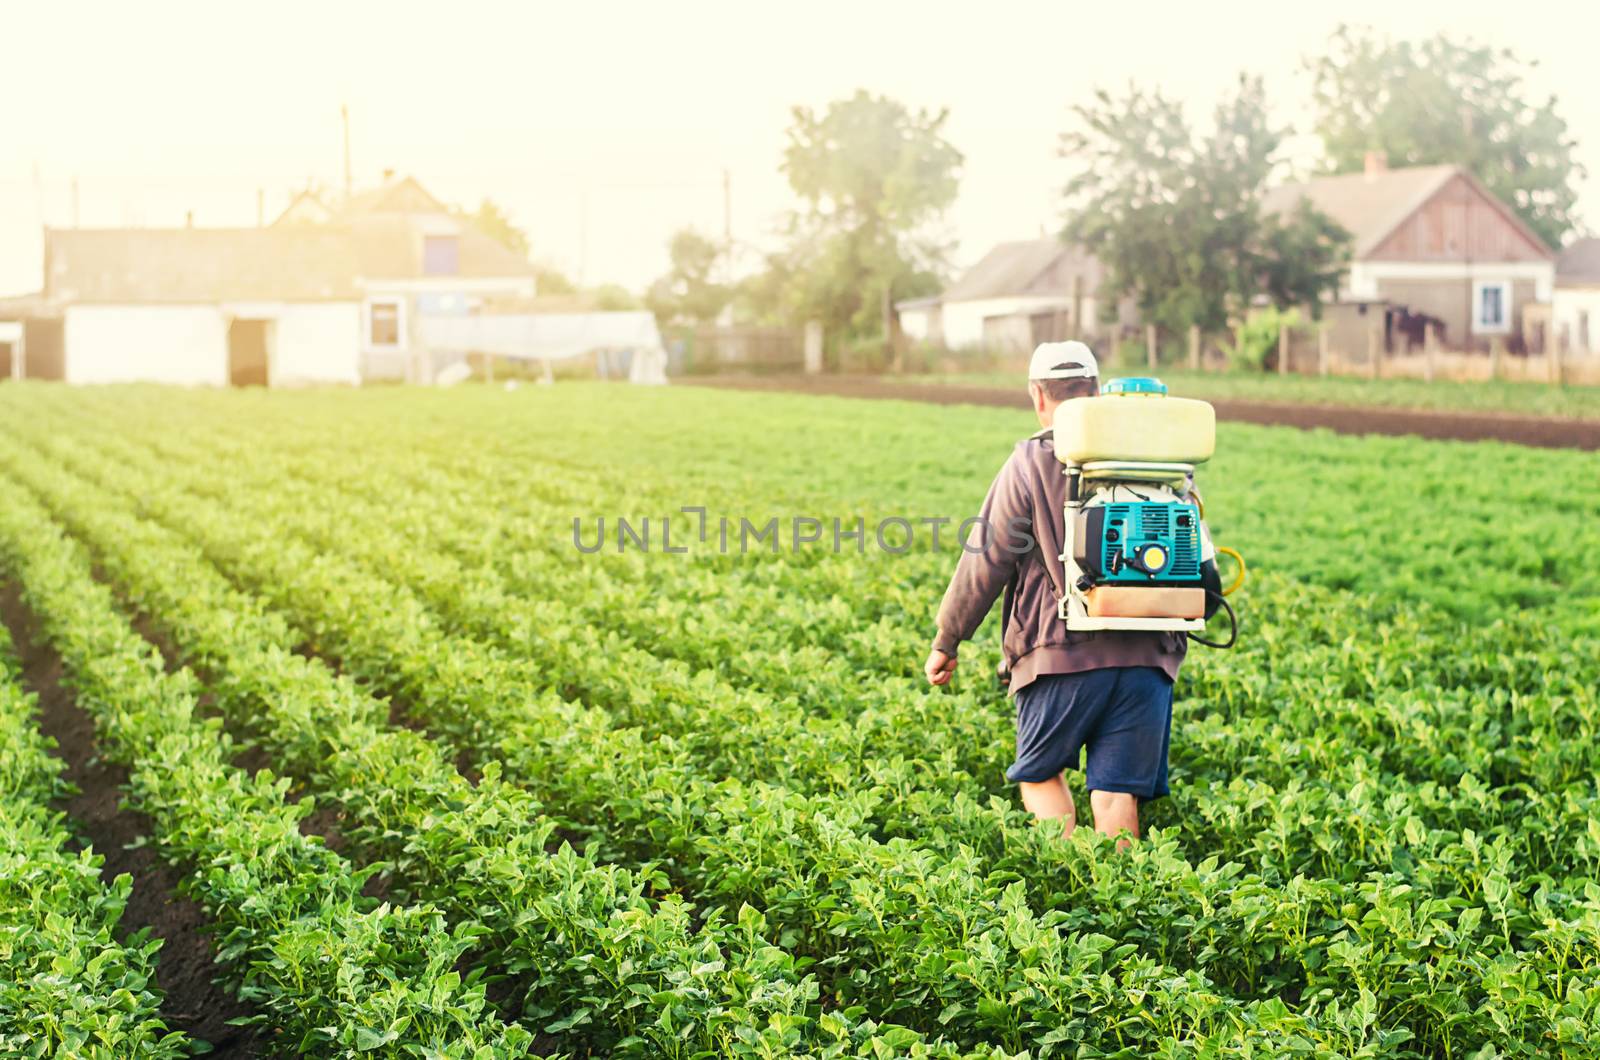 A farmer with a sprayer walks through the potato plantation. Treatment of the farm field against insect pests and fungal infections. Use chemicals in agriculture. Agriculture and agribusiness